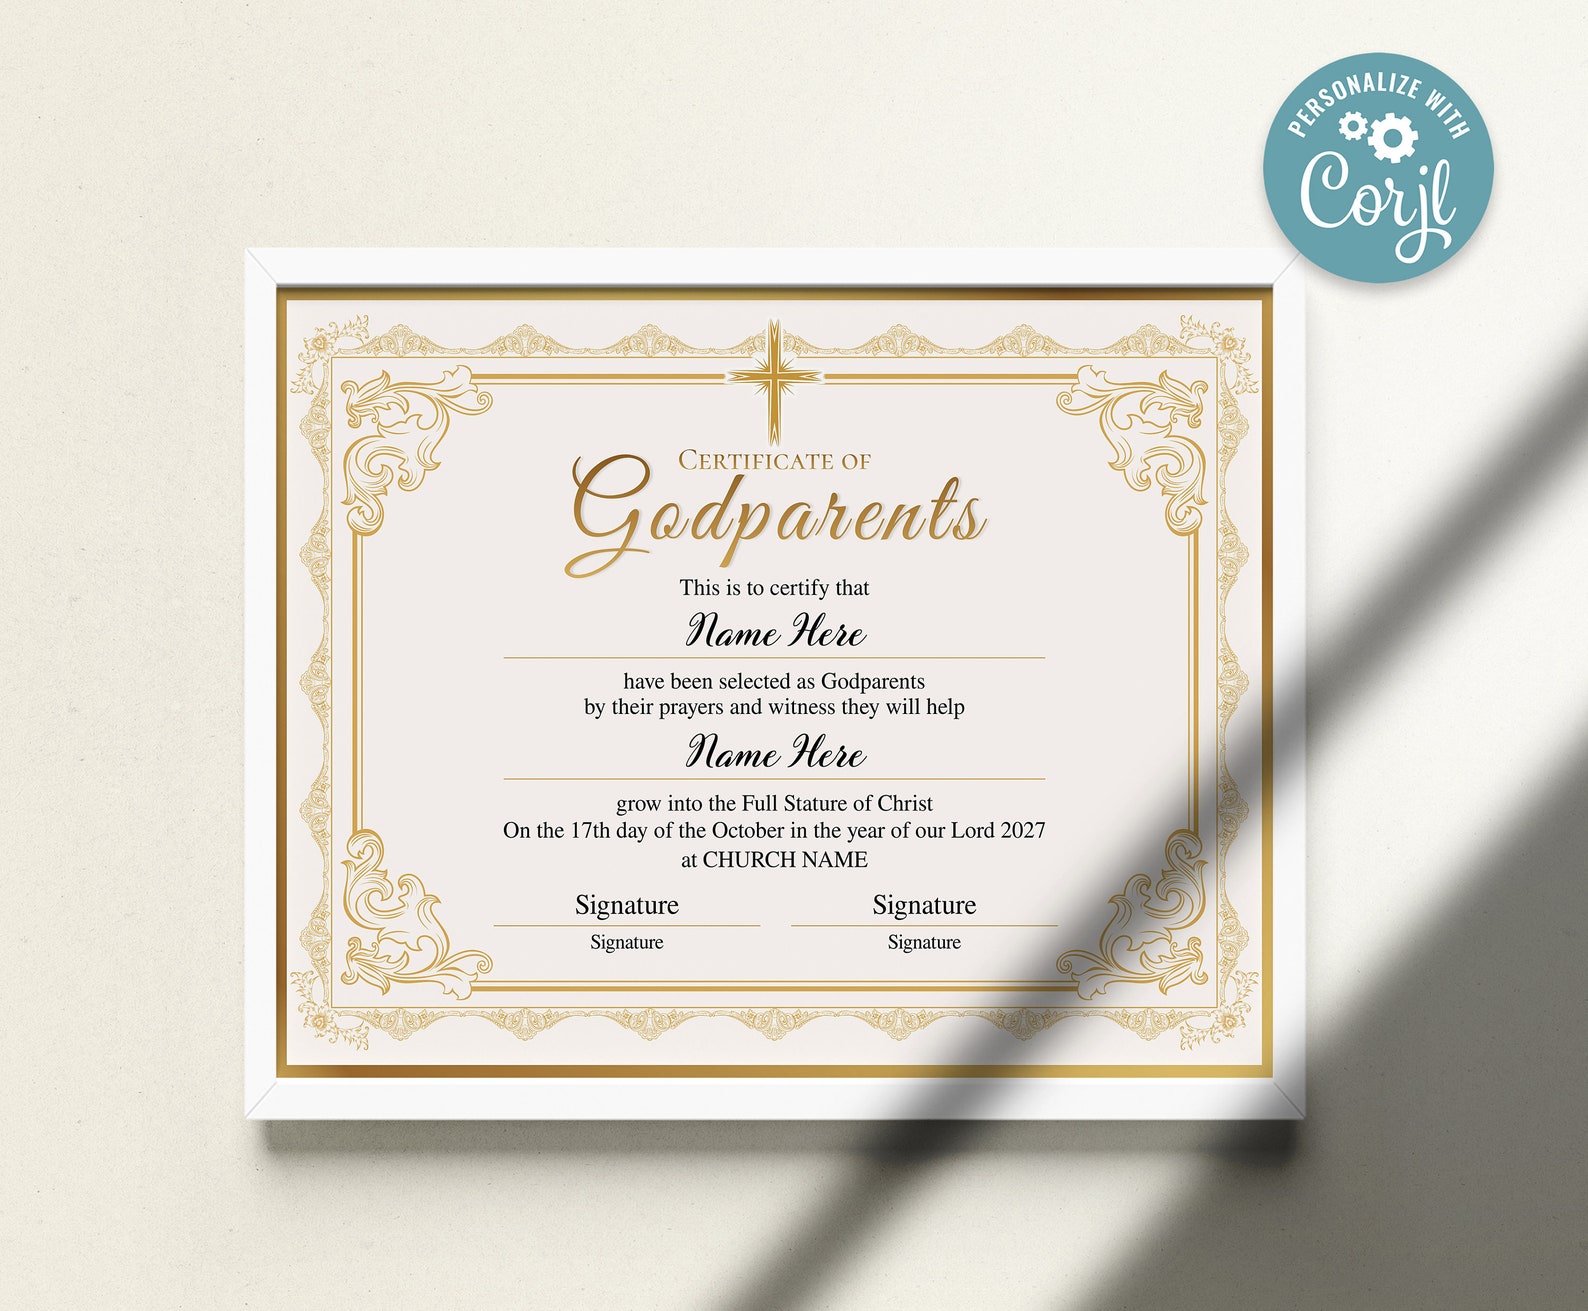 godparents-certificate-template-printable-editable-godparents-etsy